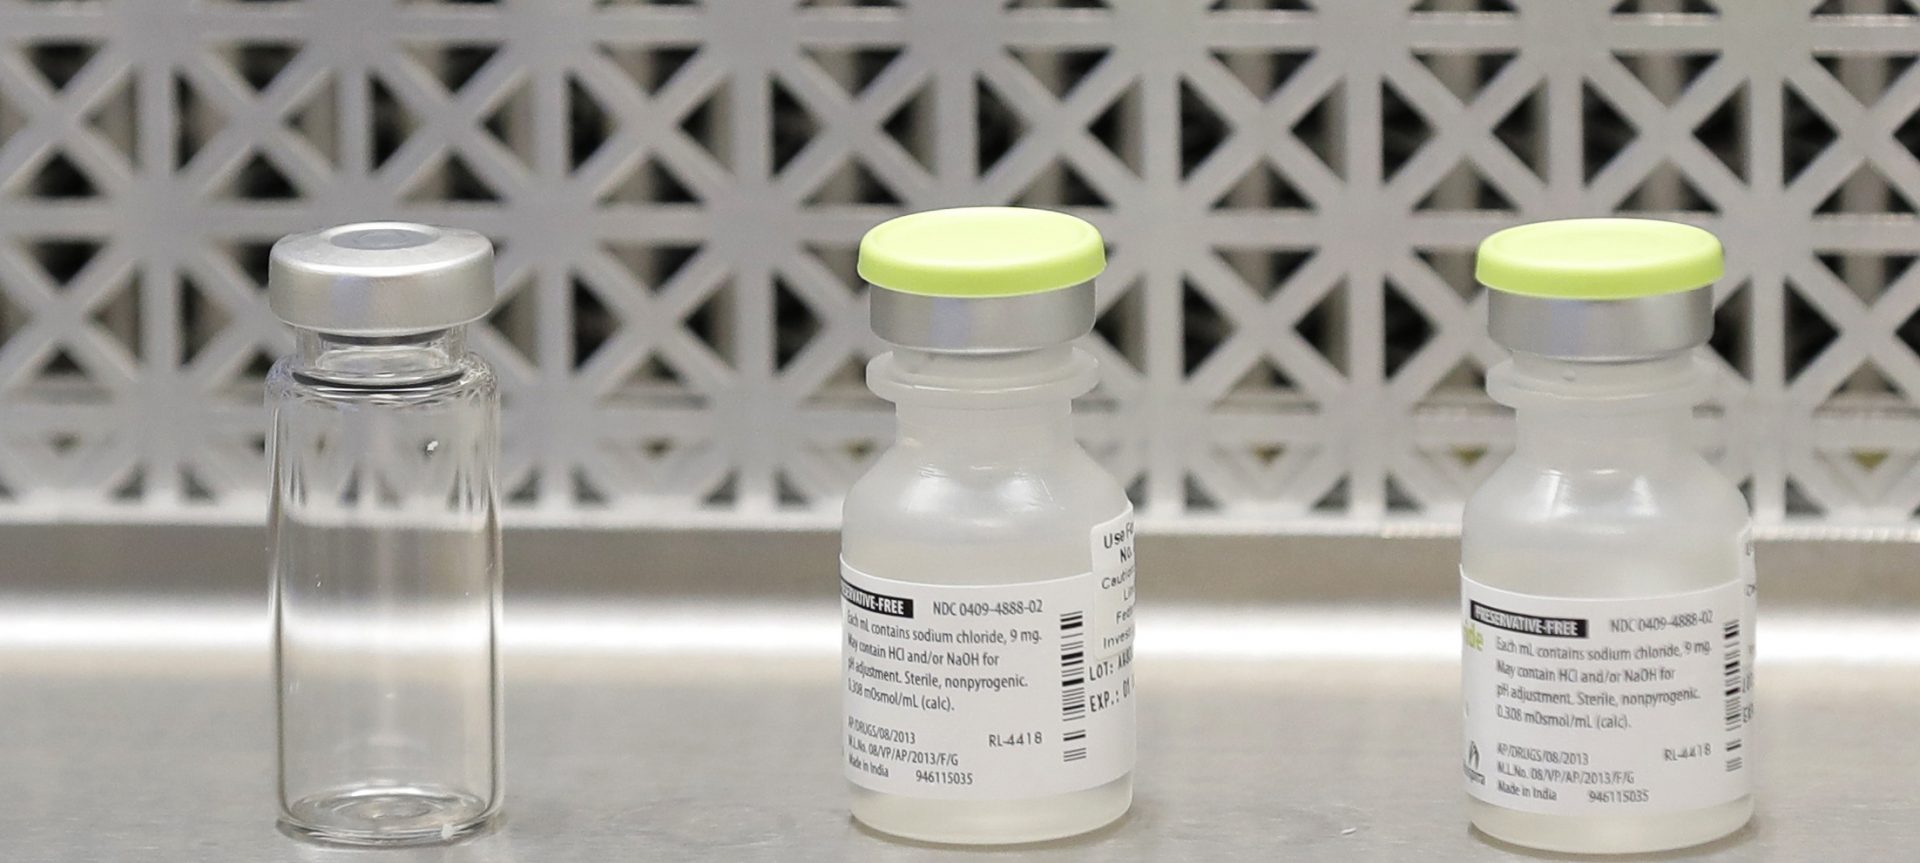 FILE PHOTO: This March 16, 2020 file photo shows vials used by pharmacists to prepare syringes used on the first day of a first-stage safety study clinical trial of the potential vaccine for COVID-19, the disease caused by the new coronavirus, in Seattle.